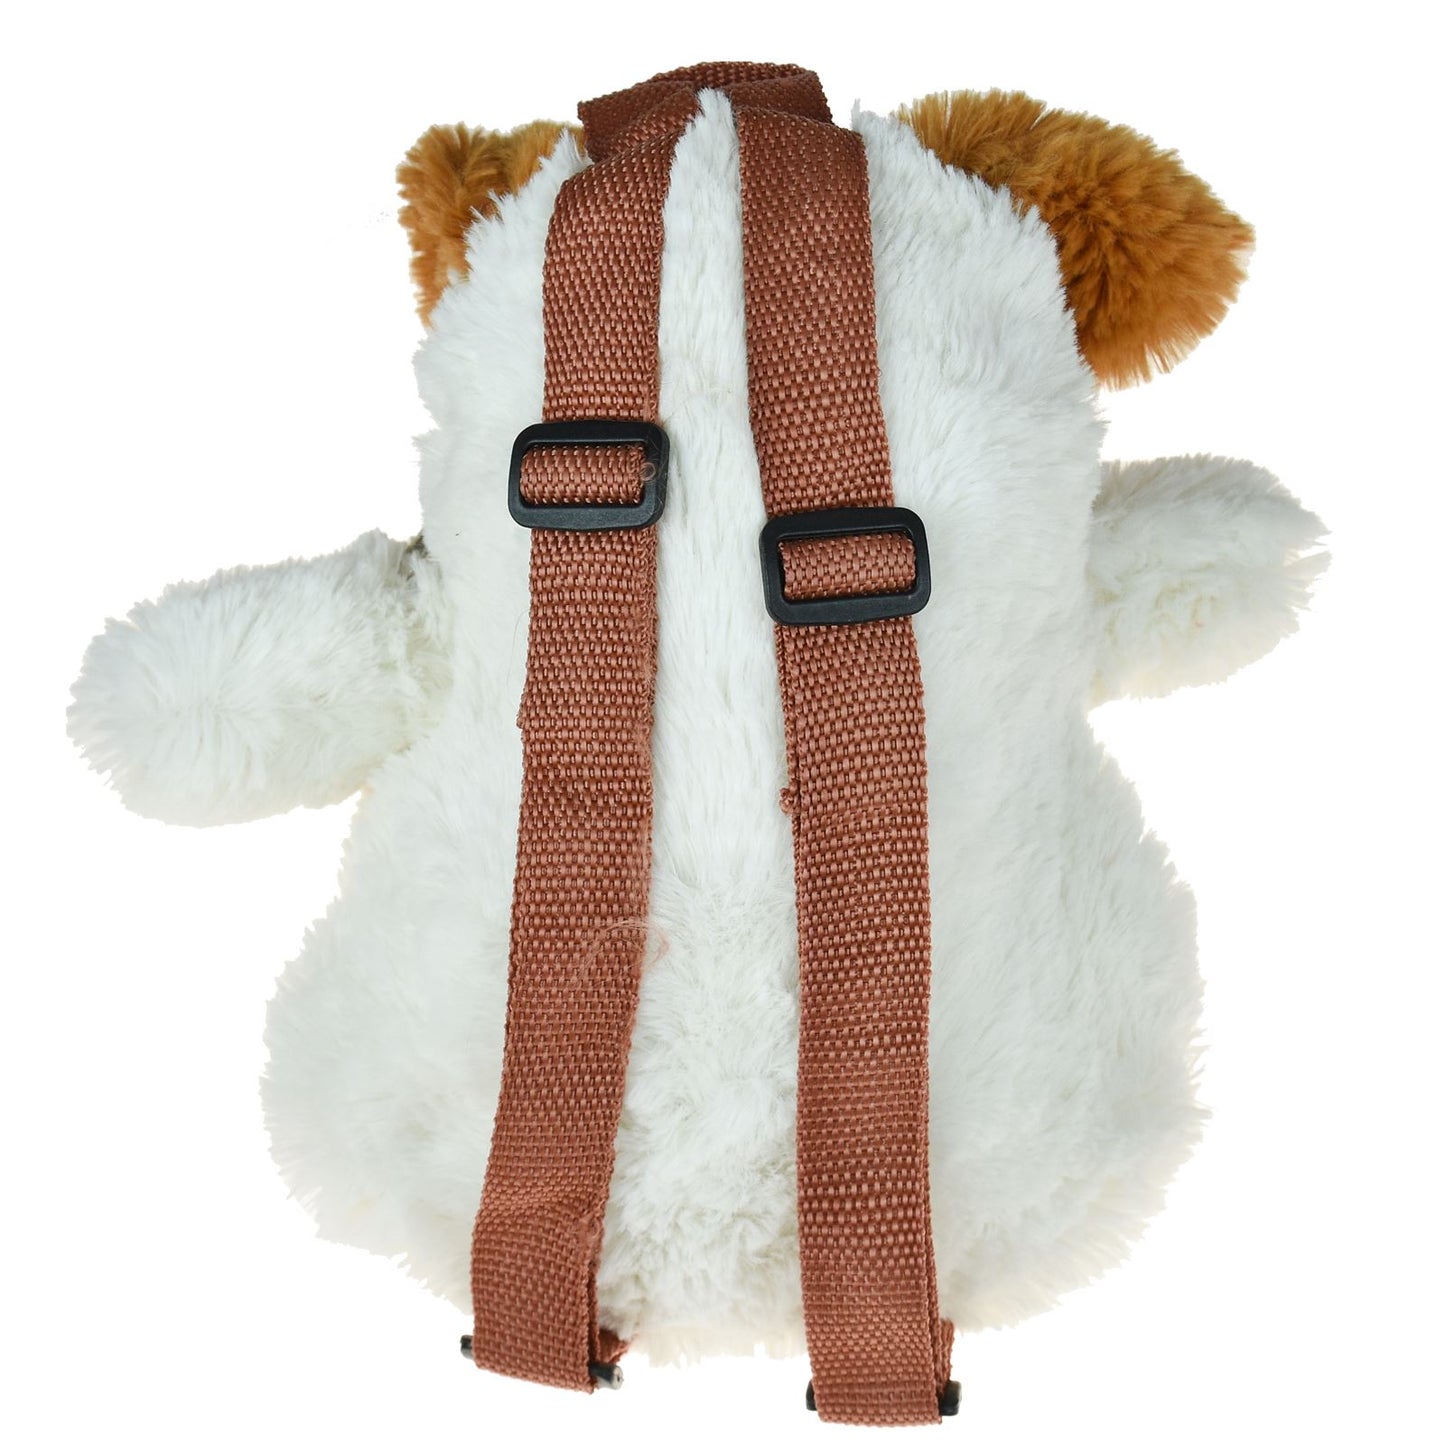 Have Fun on the Go with a Plush Animal Backpack